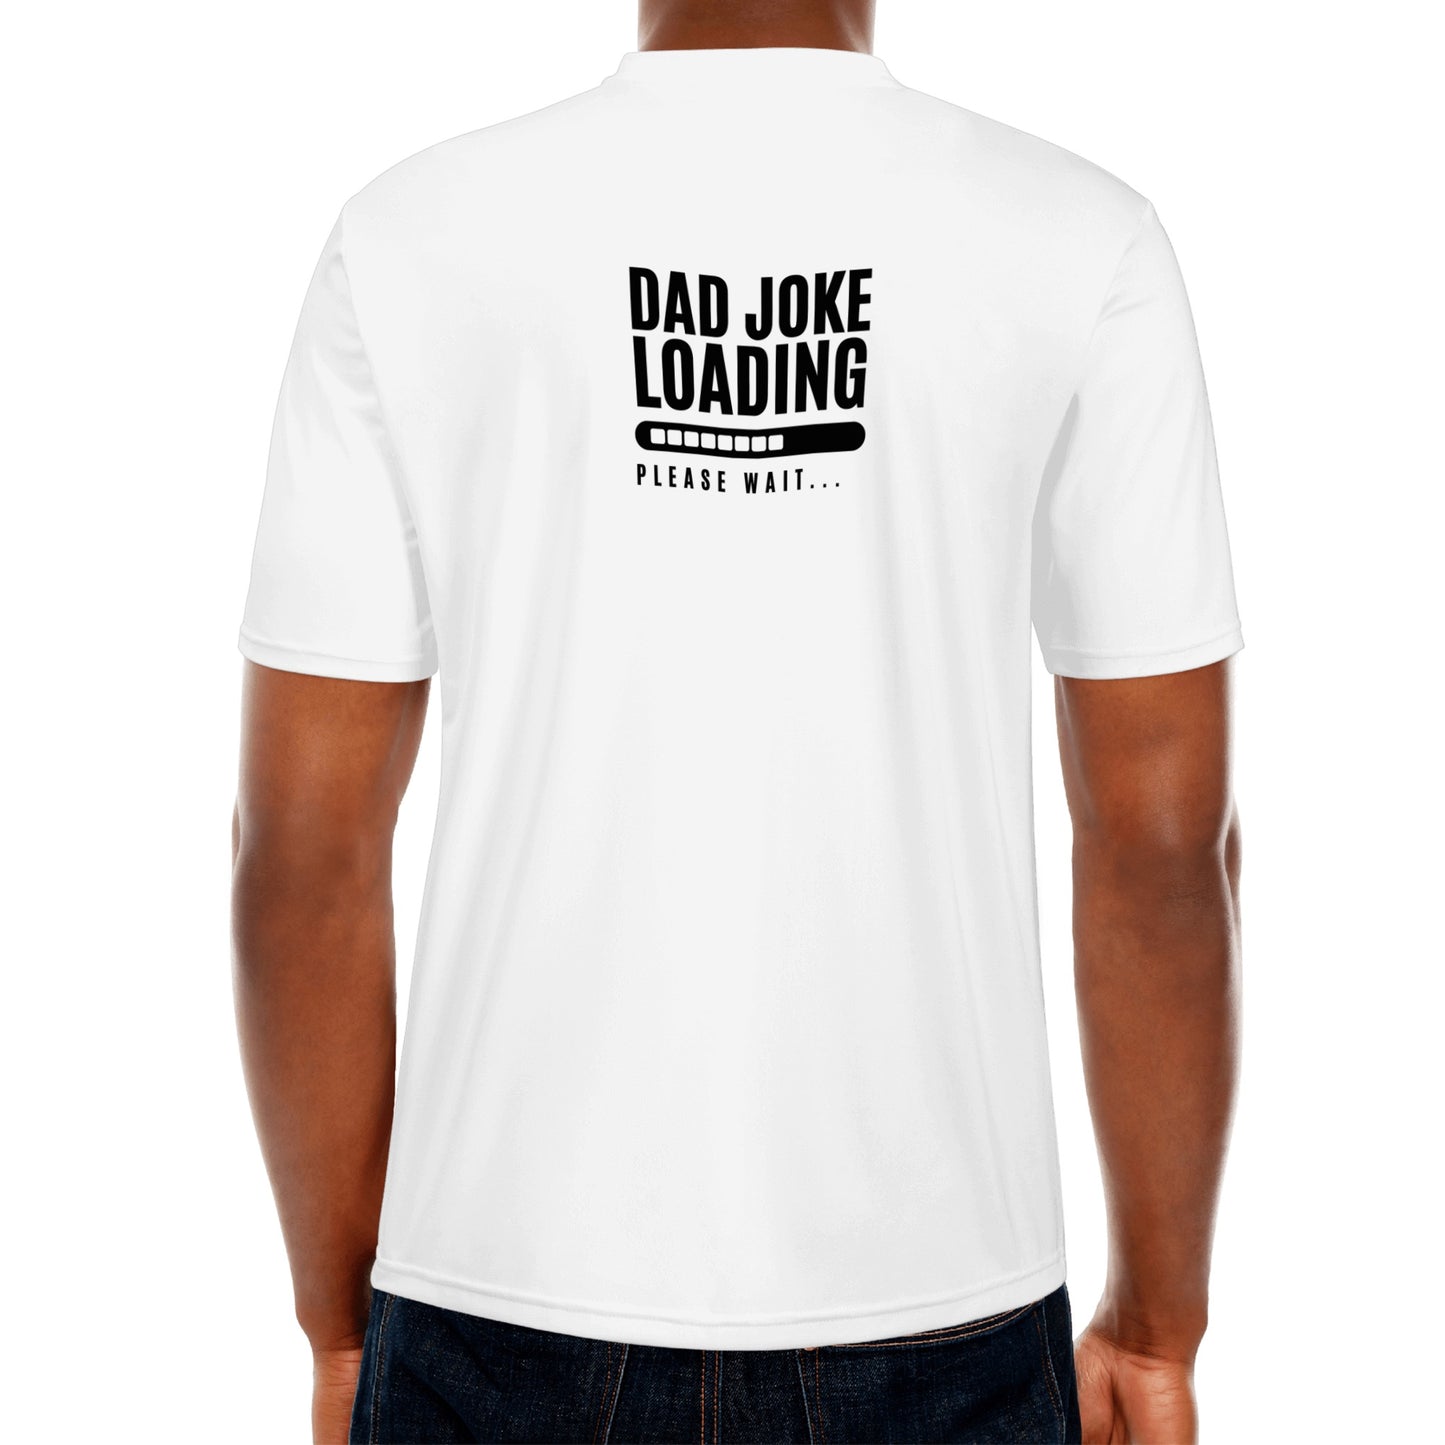 Dads Jokes | Mens All Over Print T-shirts - AGTC